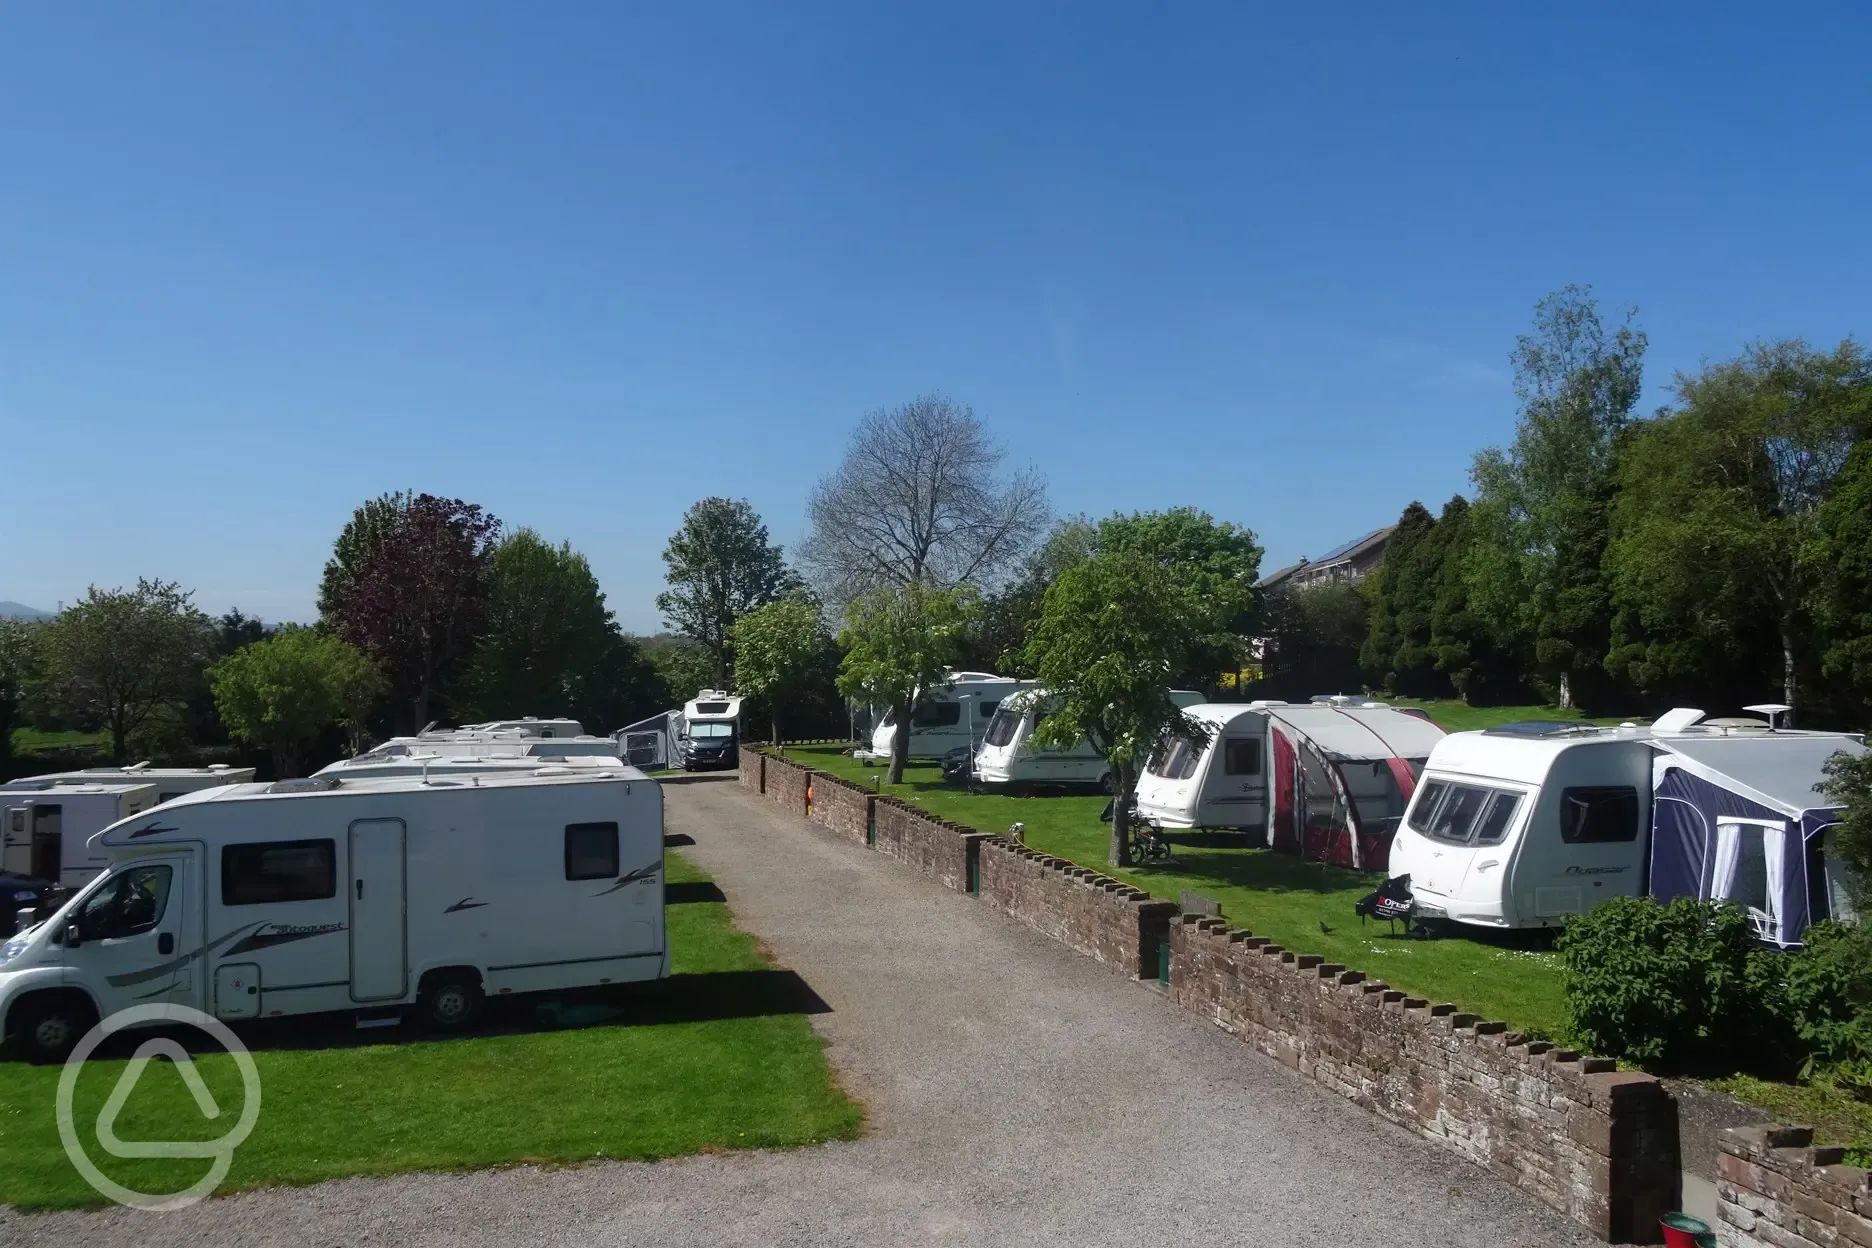 Two grass tiers at Thack Lea Caravan Park